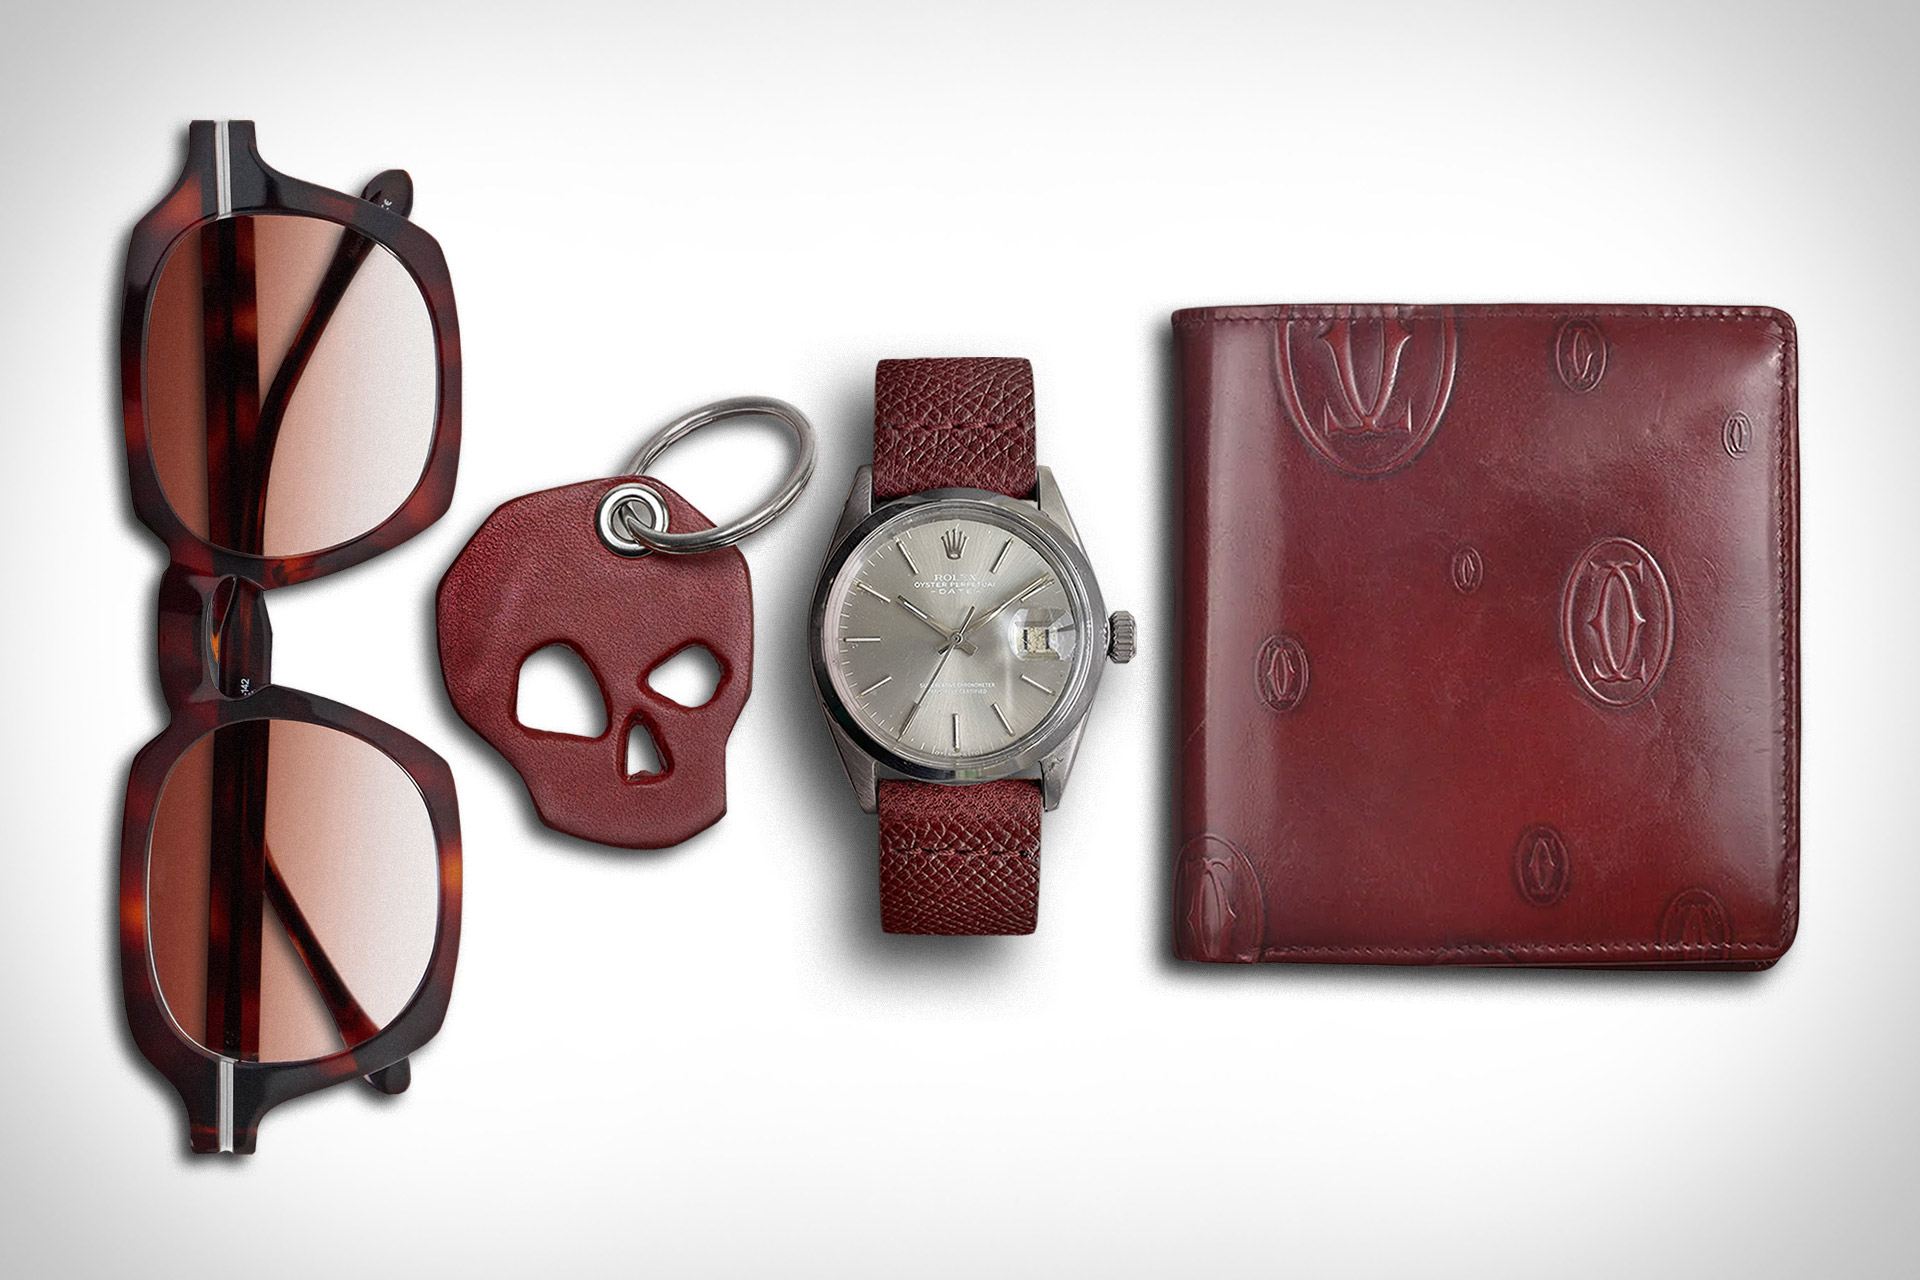 Everyday Carry: Burgundy | Uncrate, #Everyday #Carry #Burgundy #Uncrate